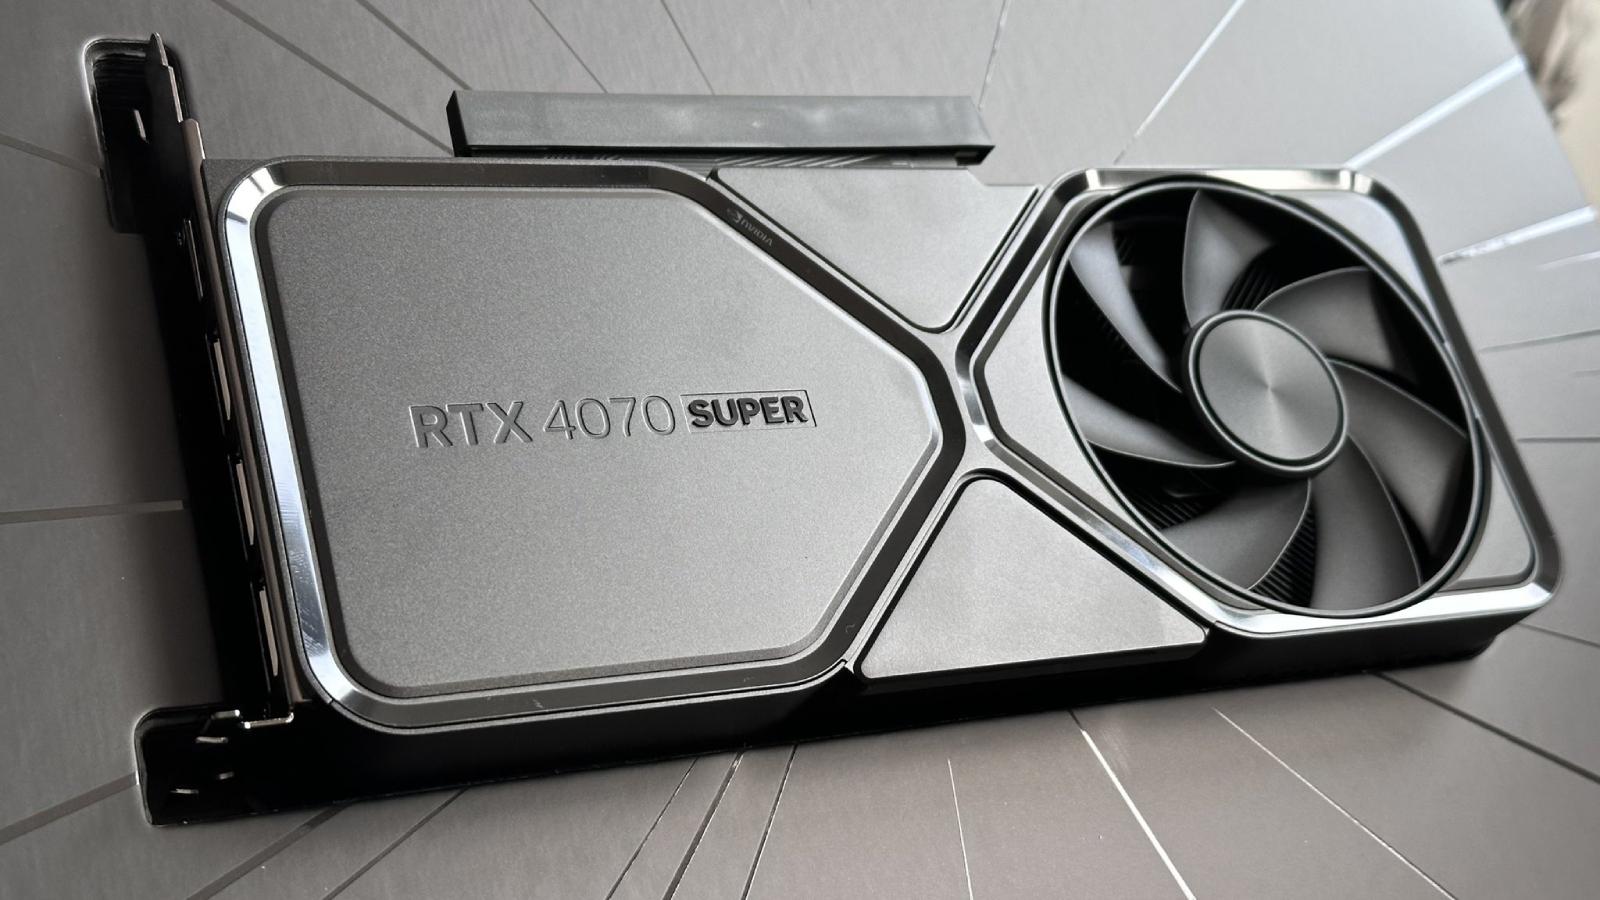 PC Gamer - Is the RTX 4070 Ti any good? Let's find out. https